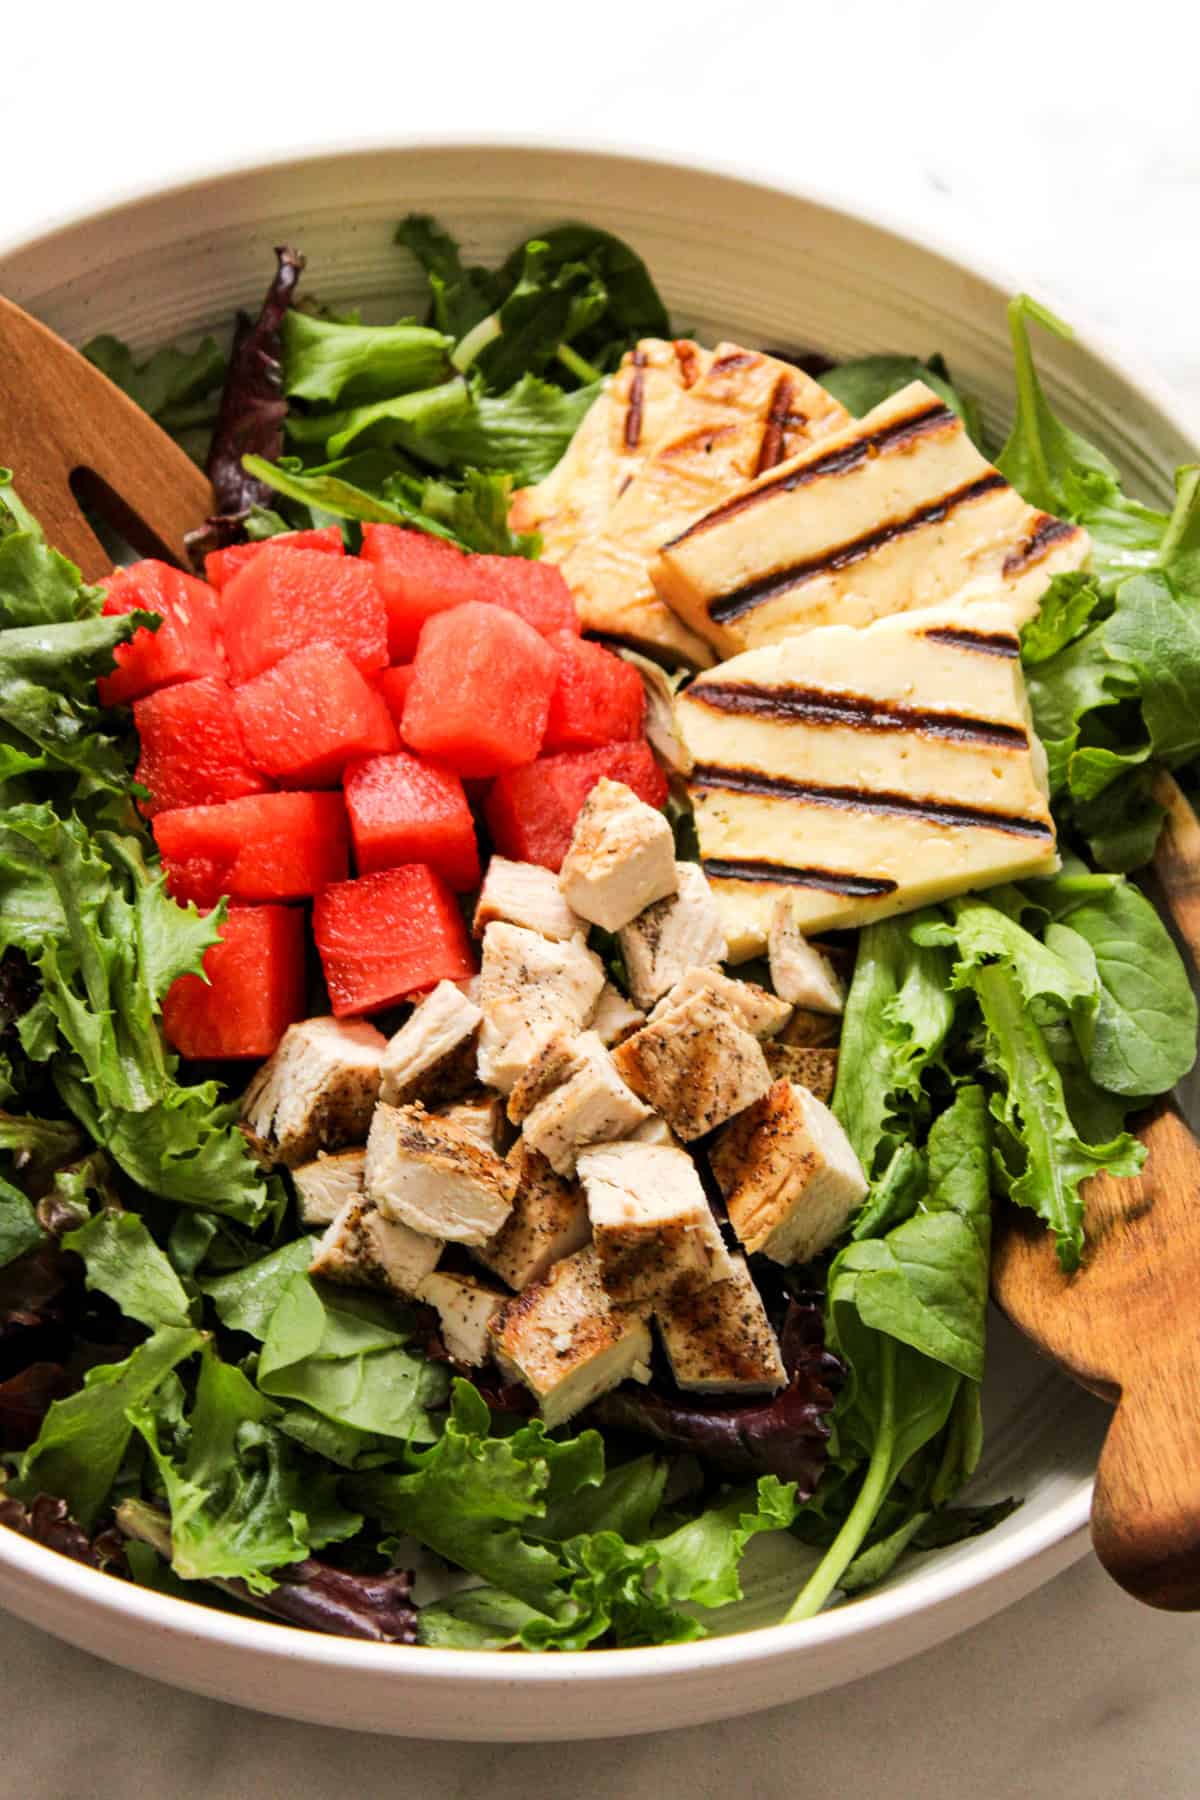 salad in a ceramic bowl topped with cubes of watermelon and chicken, and grilled halloumi cheese